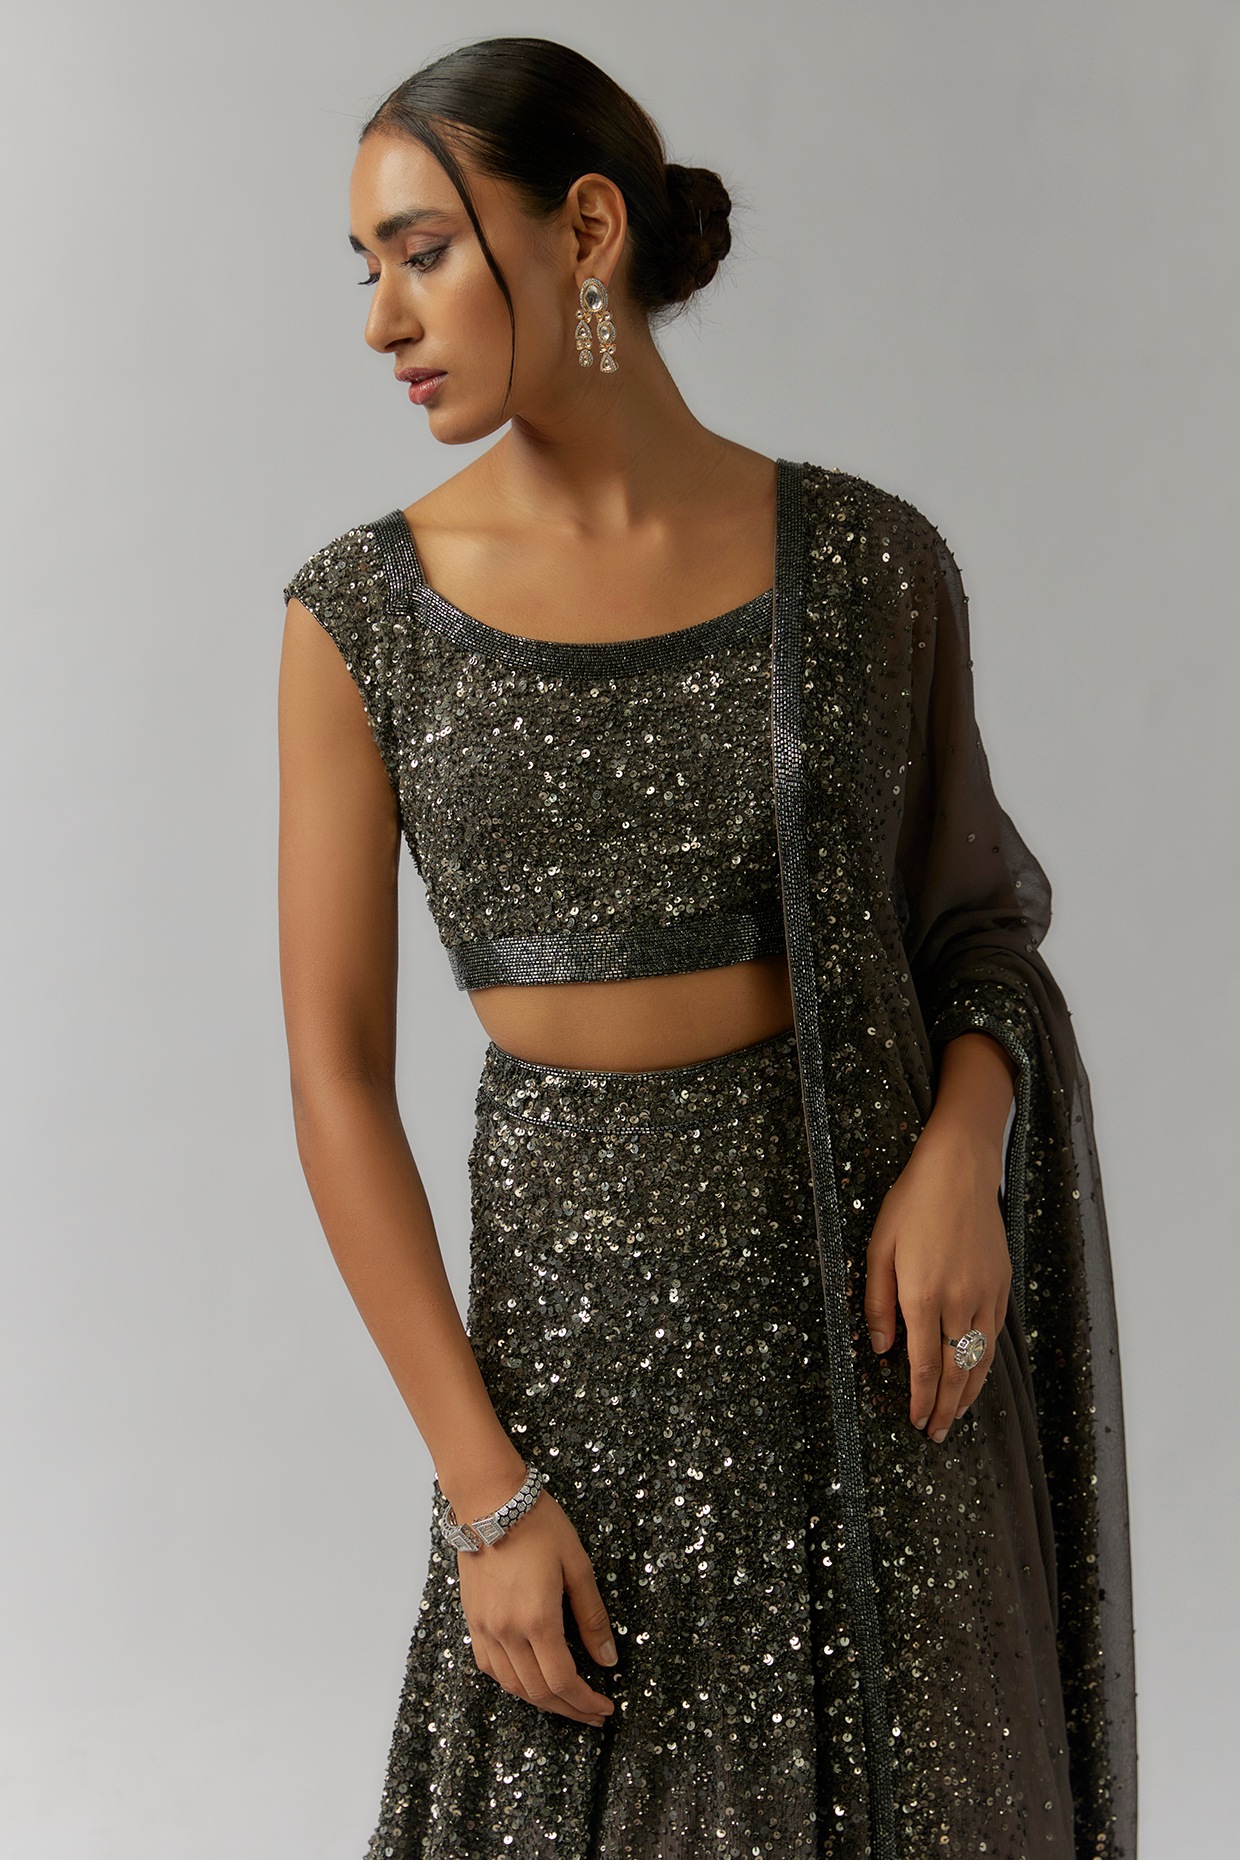 Maya all-over sequin lehenga skirt, dupatta and crop top in muted blush |  ASOS